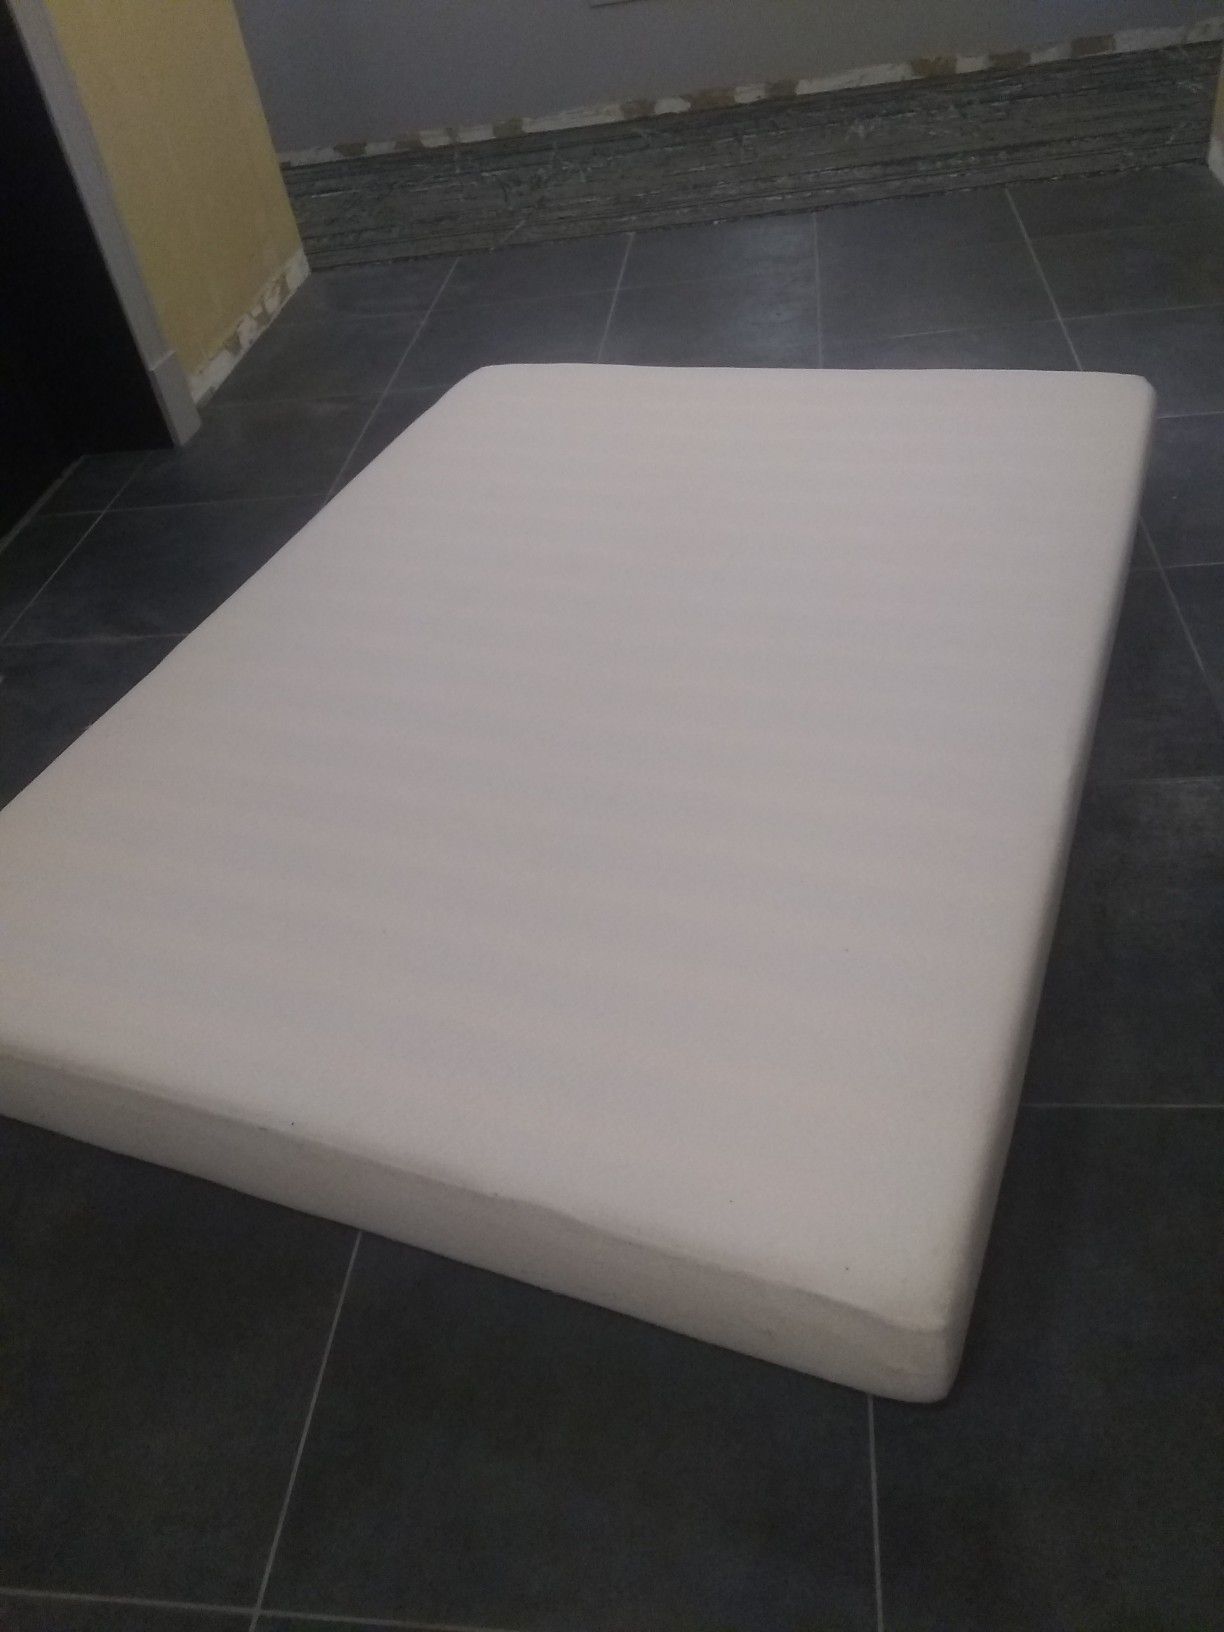 Queen size mattress very good condition (1 year old)